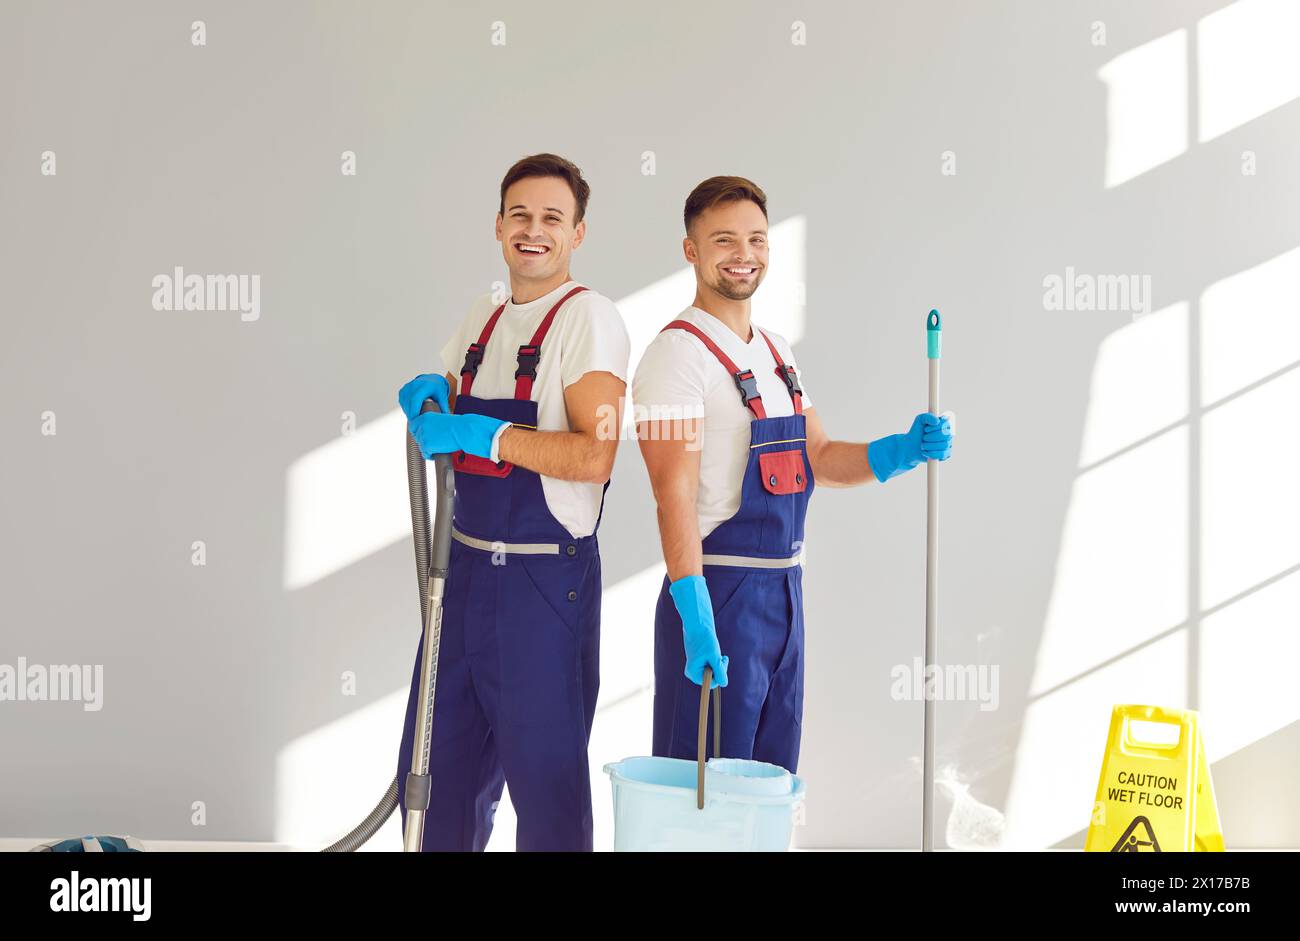 Portrait of two happy, smiling male janitors in uniforms with cleaning equipment Stock Photo